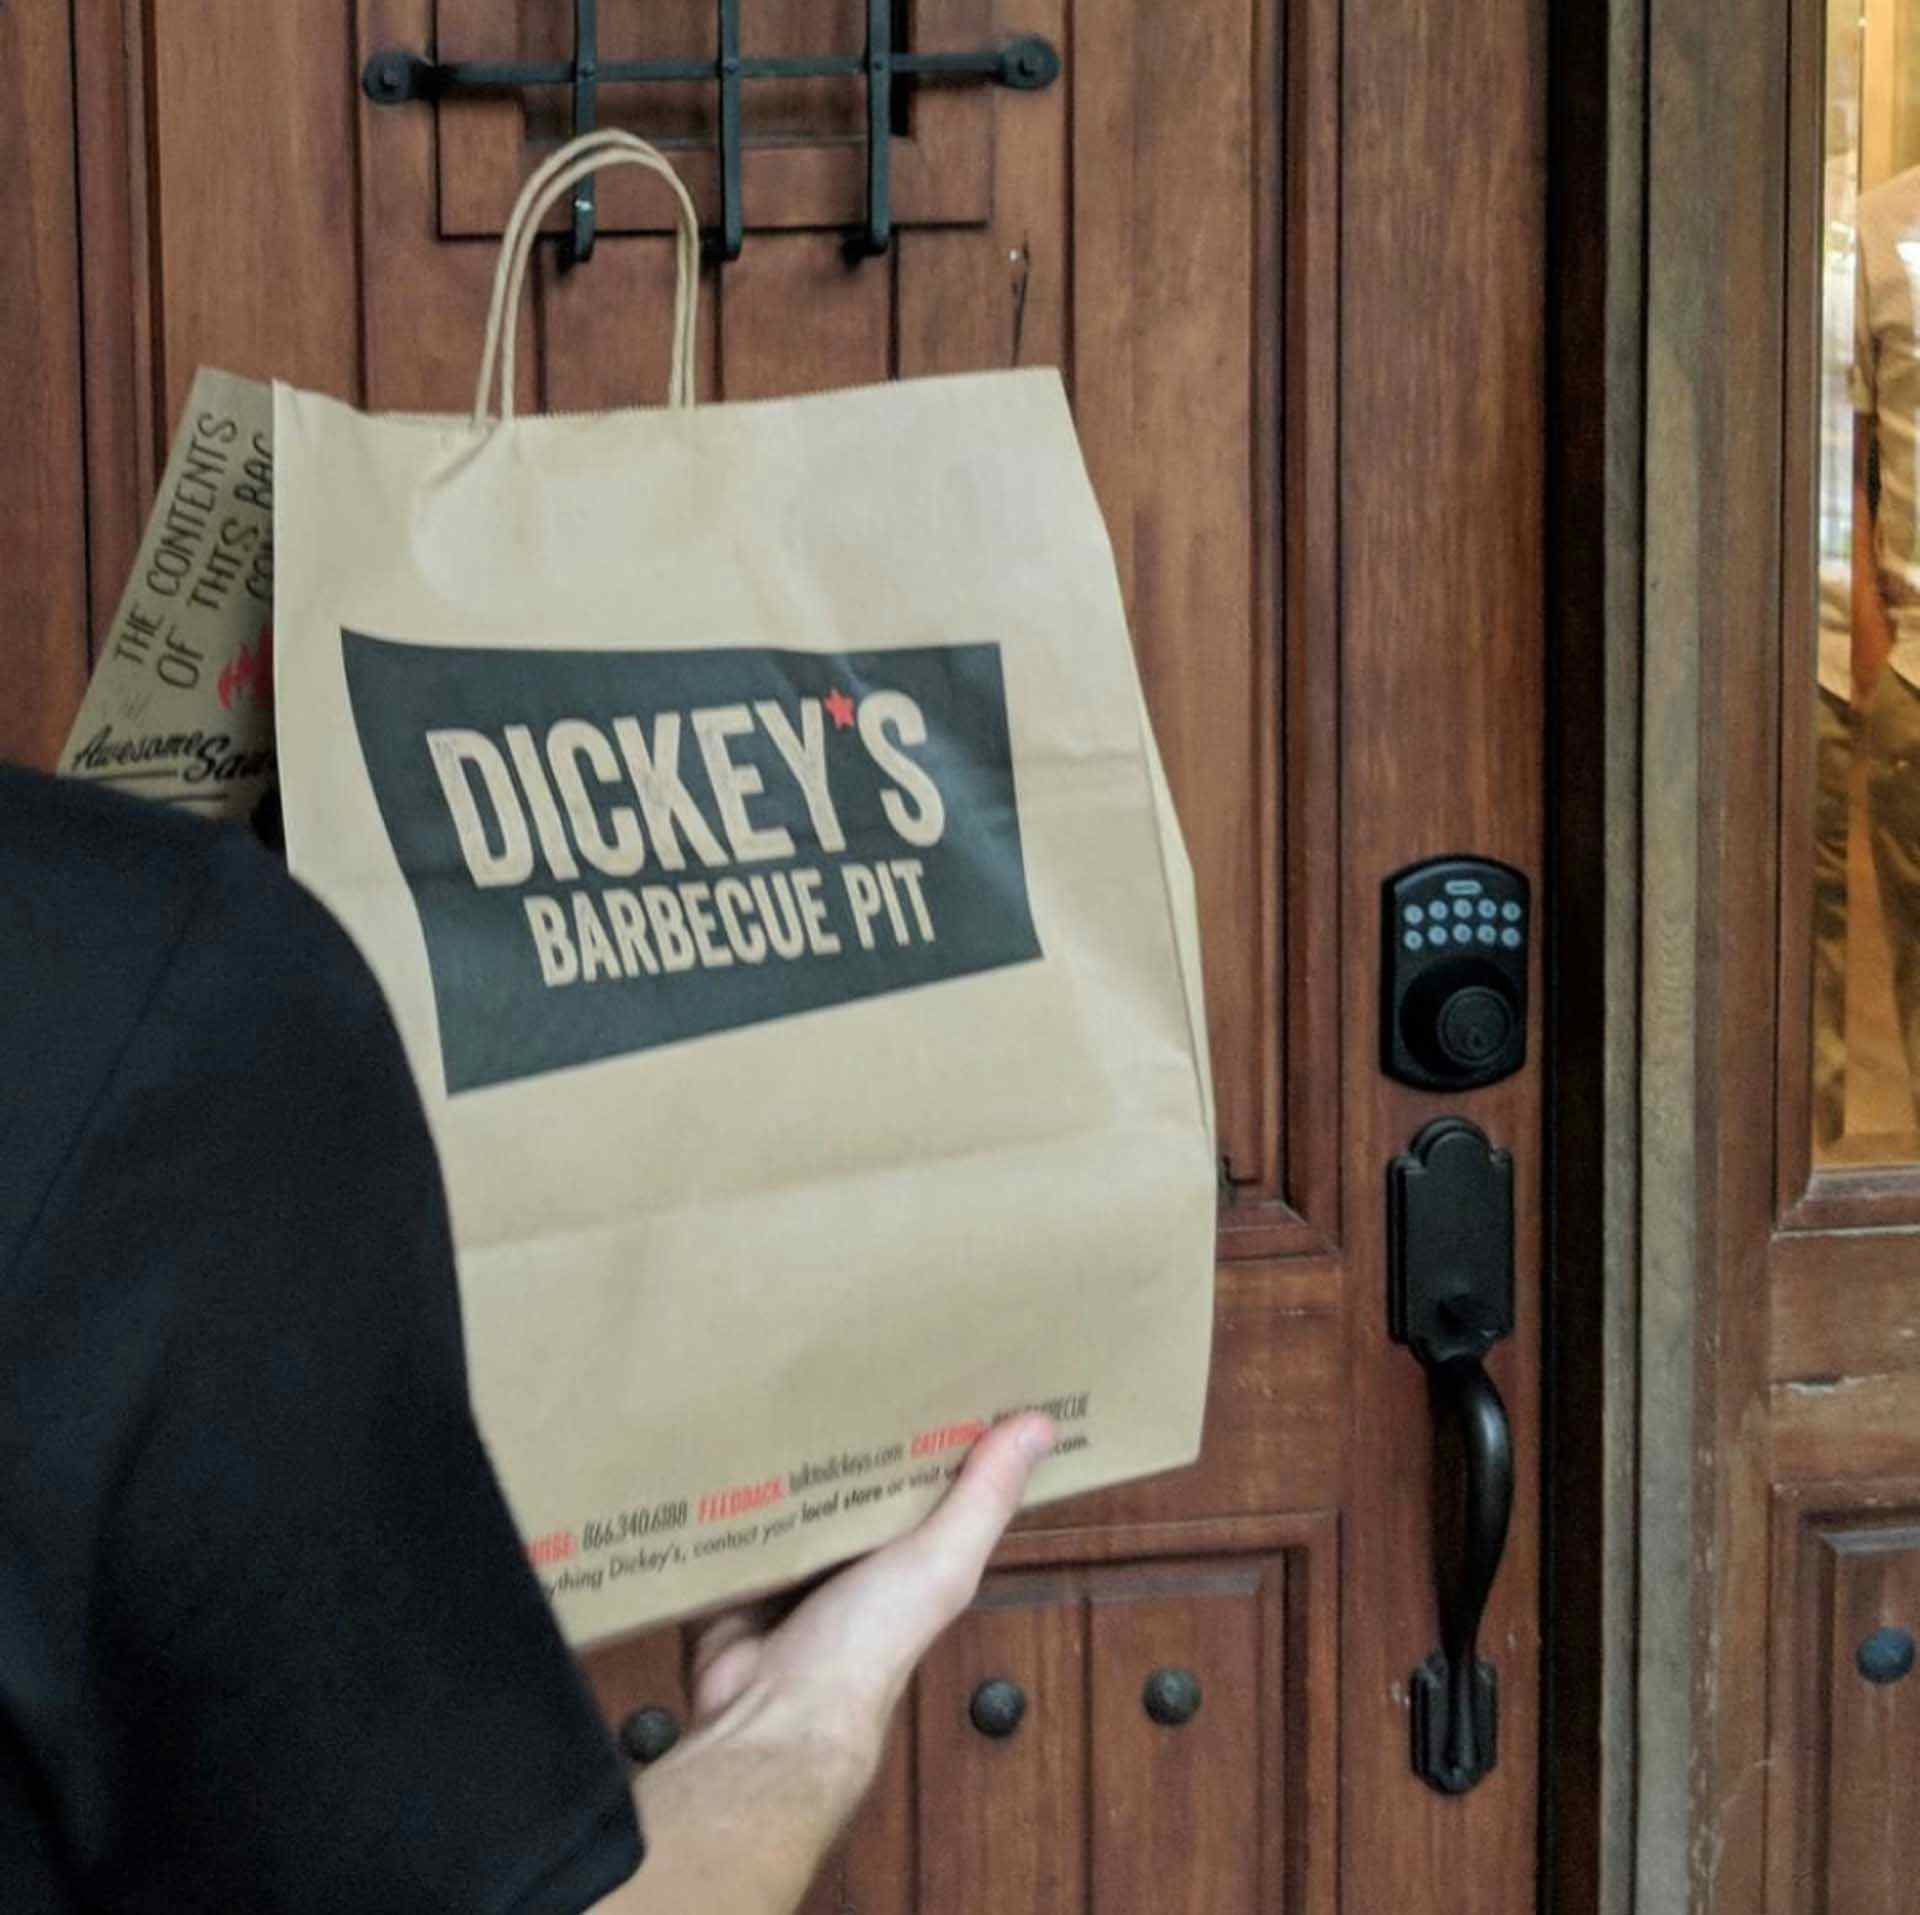 Restaurant News: Free Delivery Through March at Dickey’s Barbecue Pit